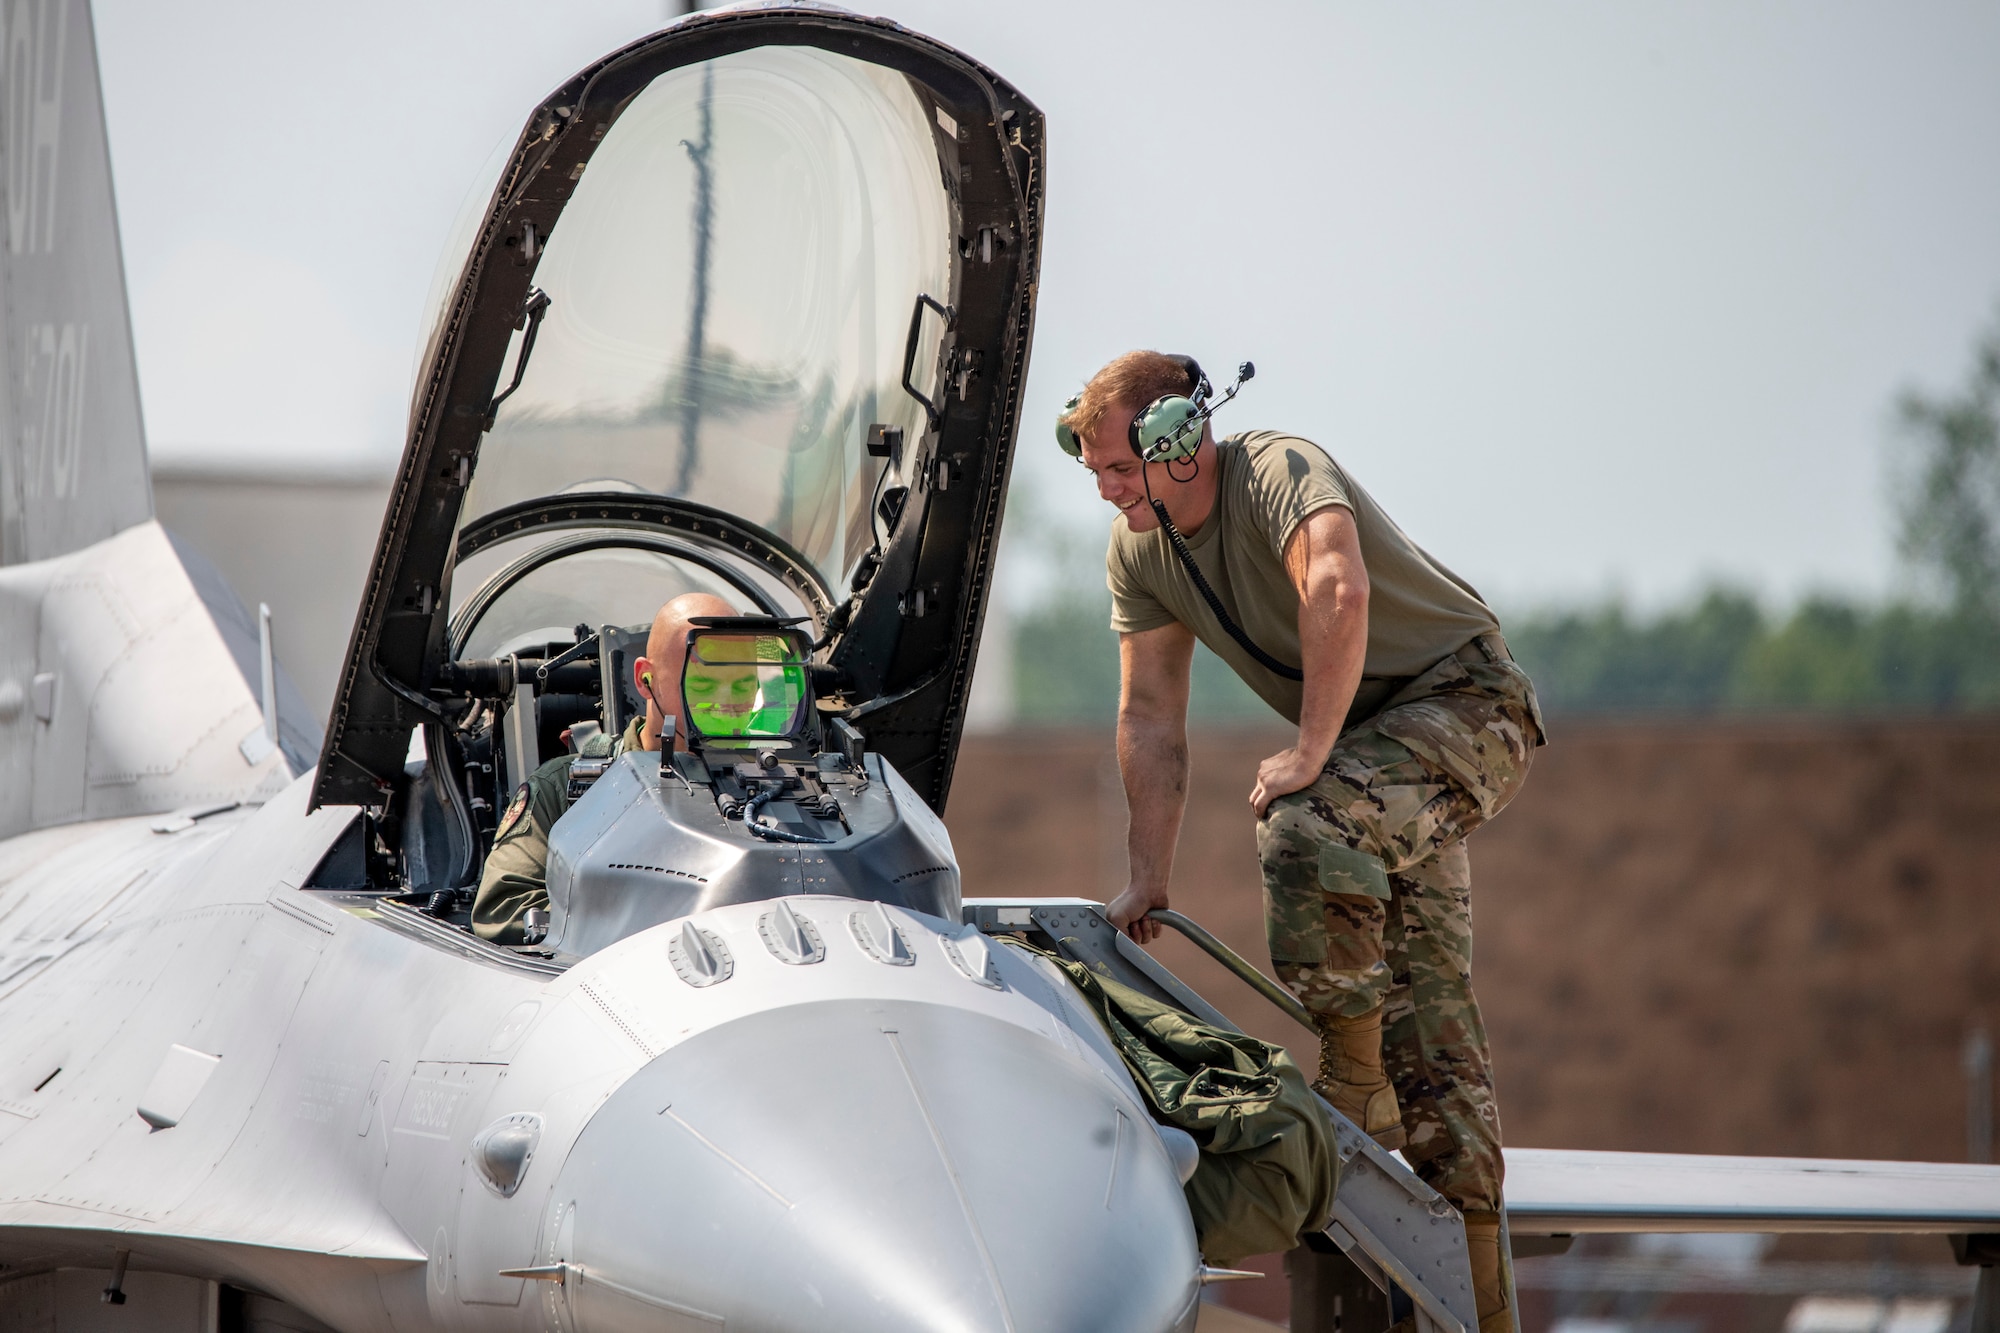 U.S. Air Force Airman 1st Class Liam McDonald, a crew chief assigned to the Ohio National Guard's 180th Fighter Wing, prepares Capt. Joshua Caudill, an F-16 fighter pilot assigned to the 180FW, prepare for a training flight at the 180FW in Swanton, Ohio, Aug. 27, 2020.